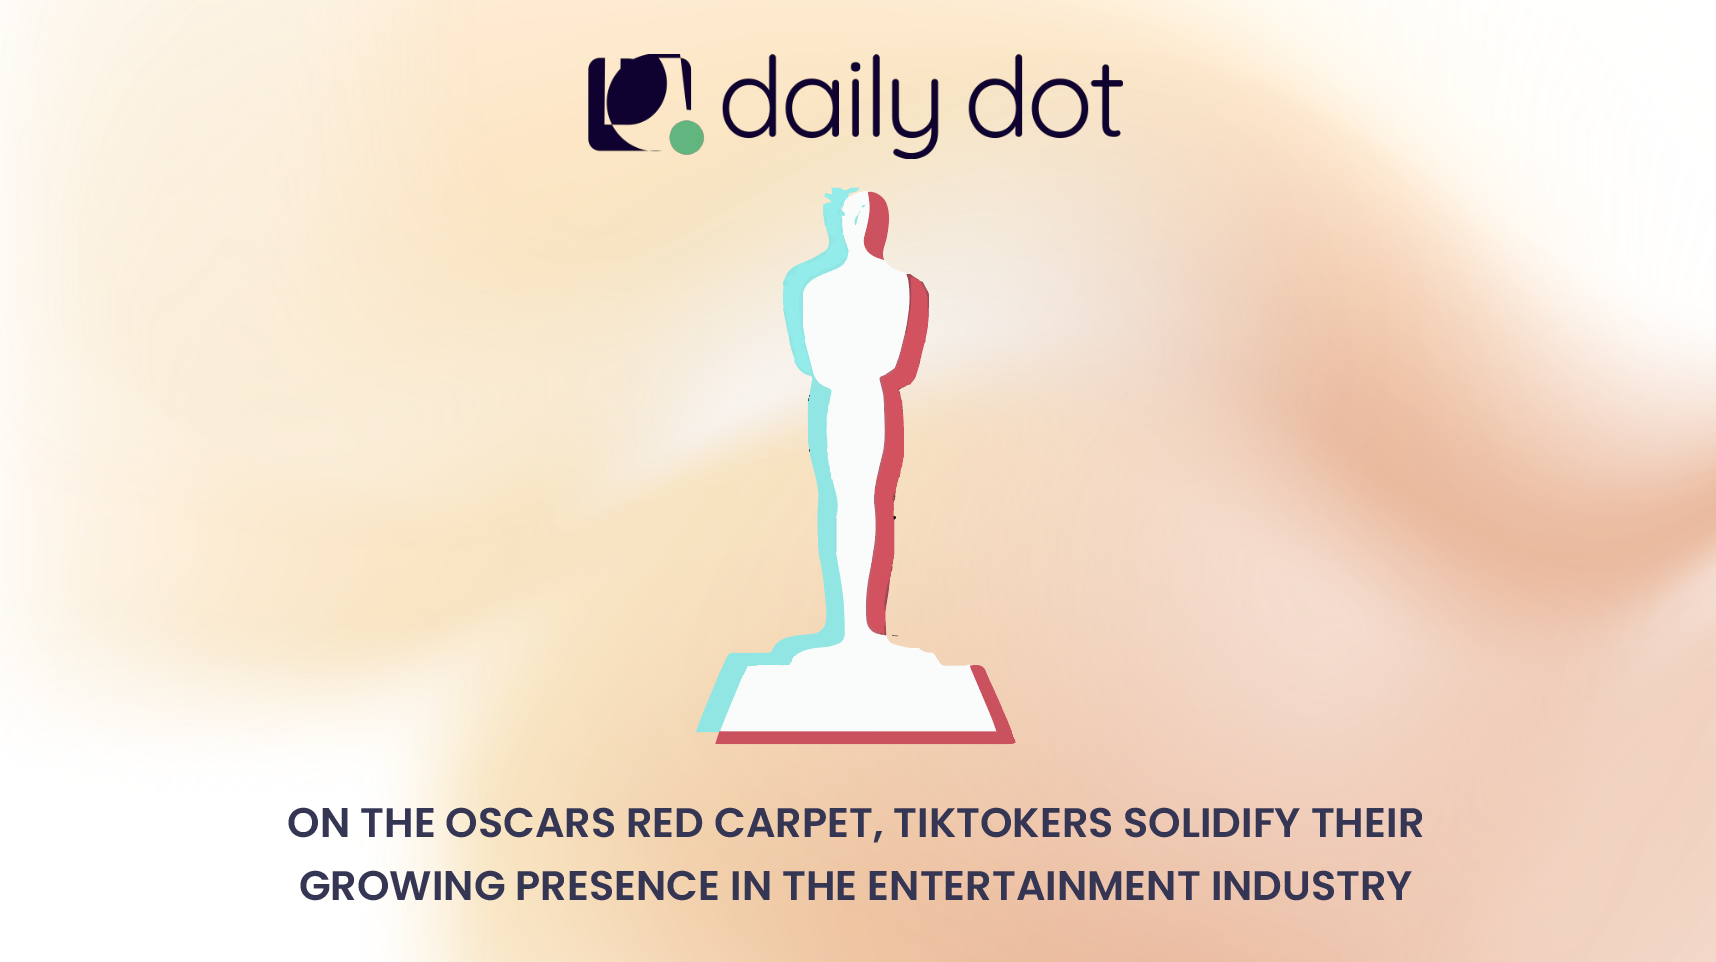 TikTokers solidify their growing presence on the Oscars red carpet